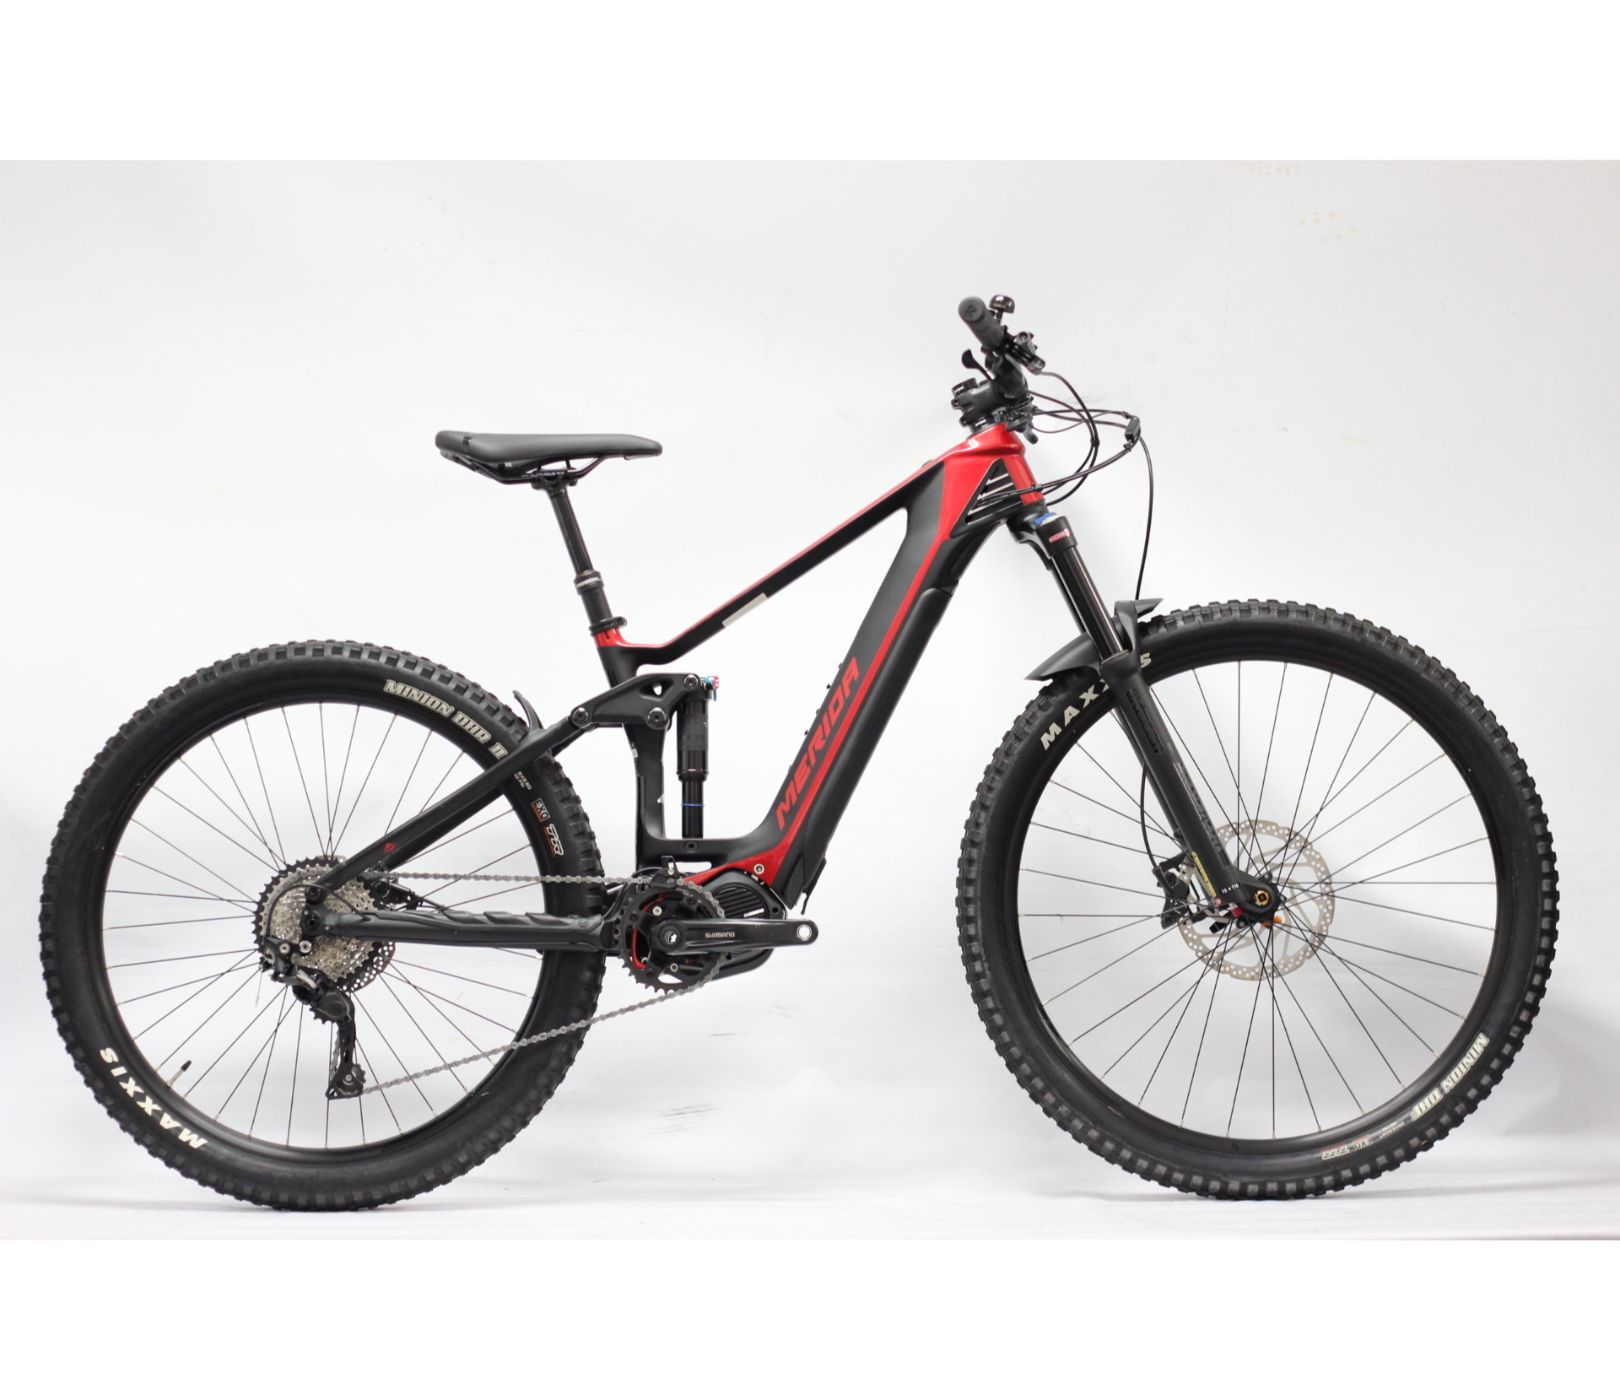 Pre-Owned Merida E-One- Forty Dual Suspension Carbon Mountain Bike -  Small